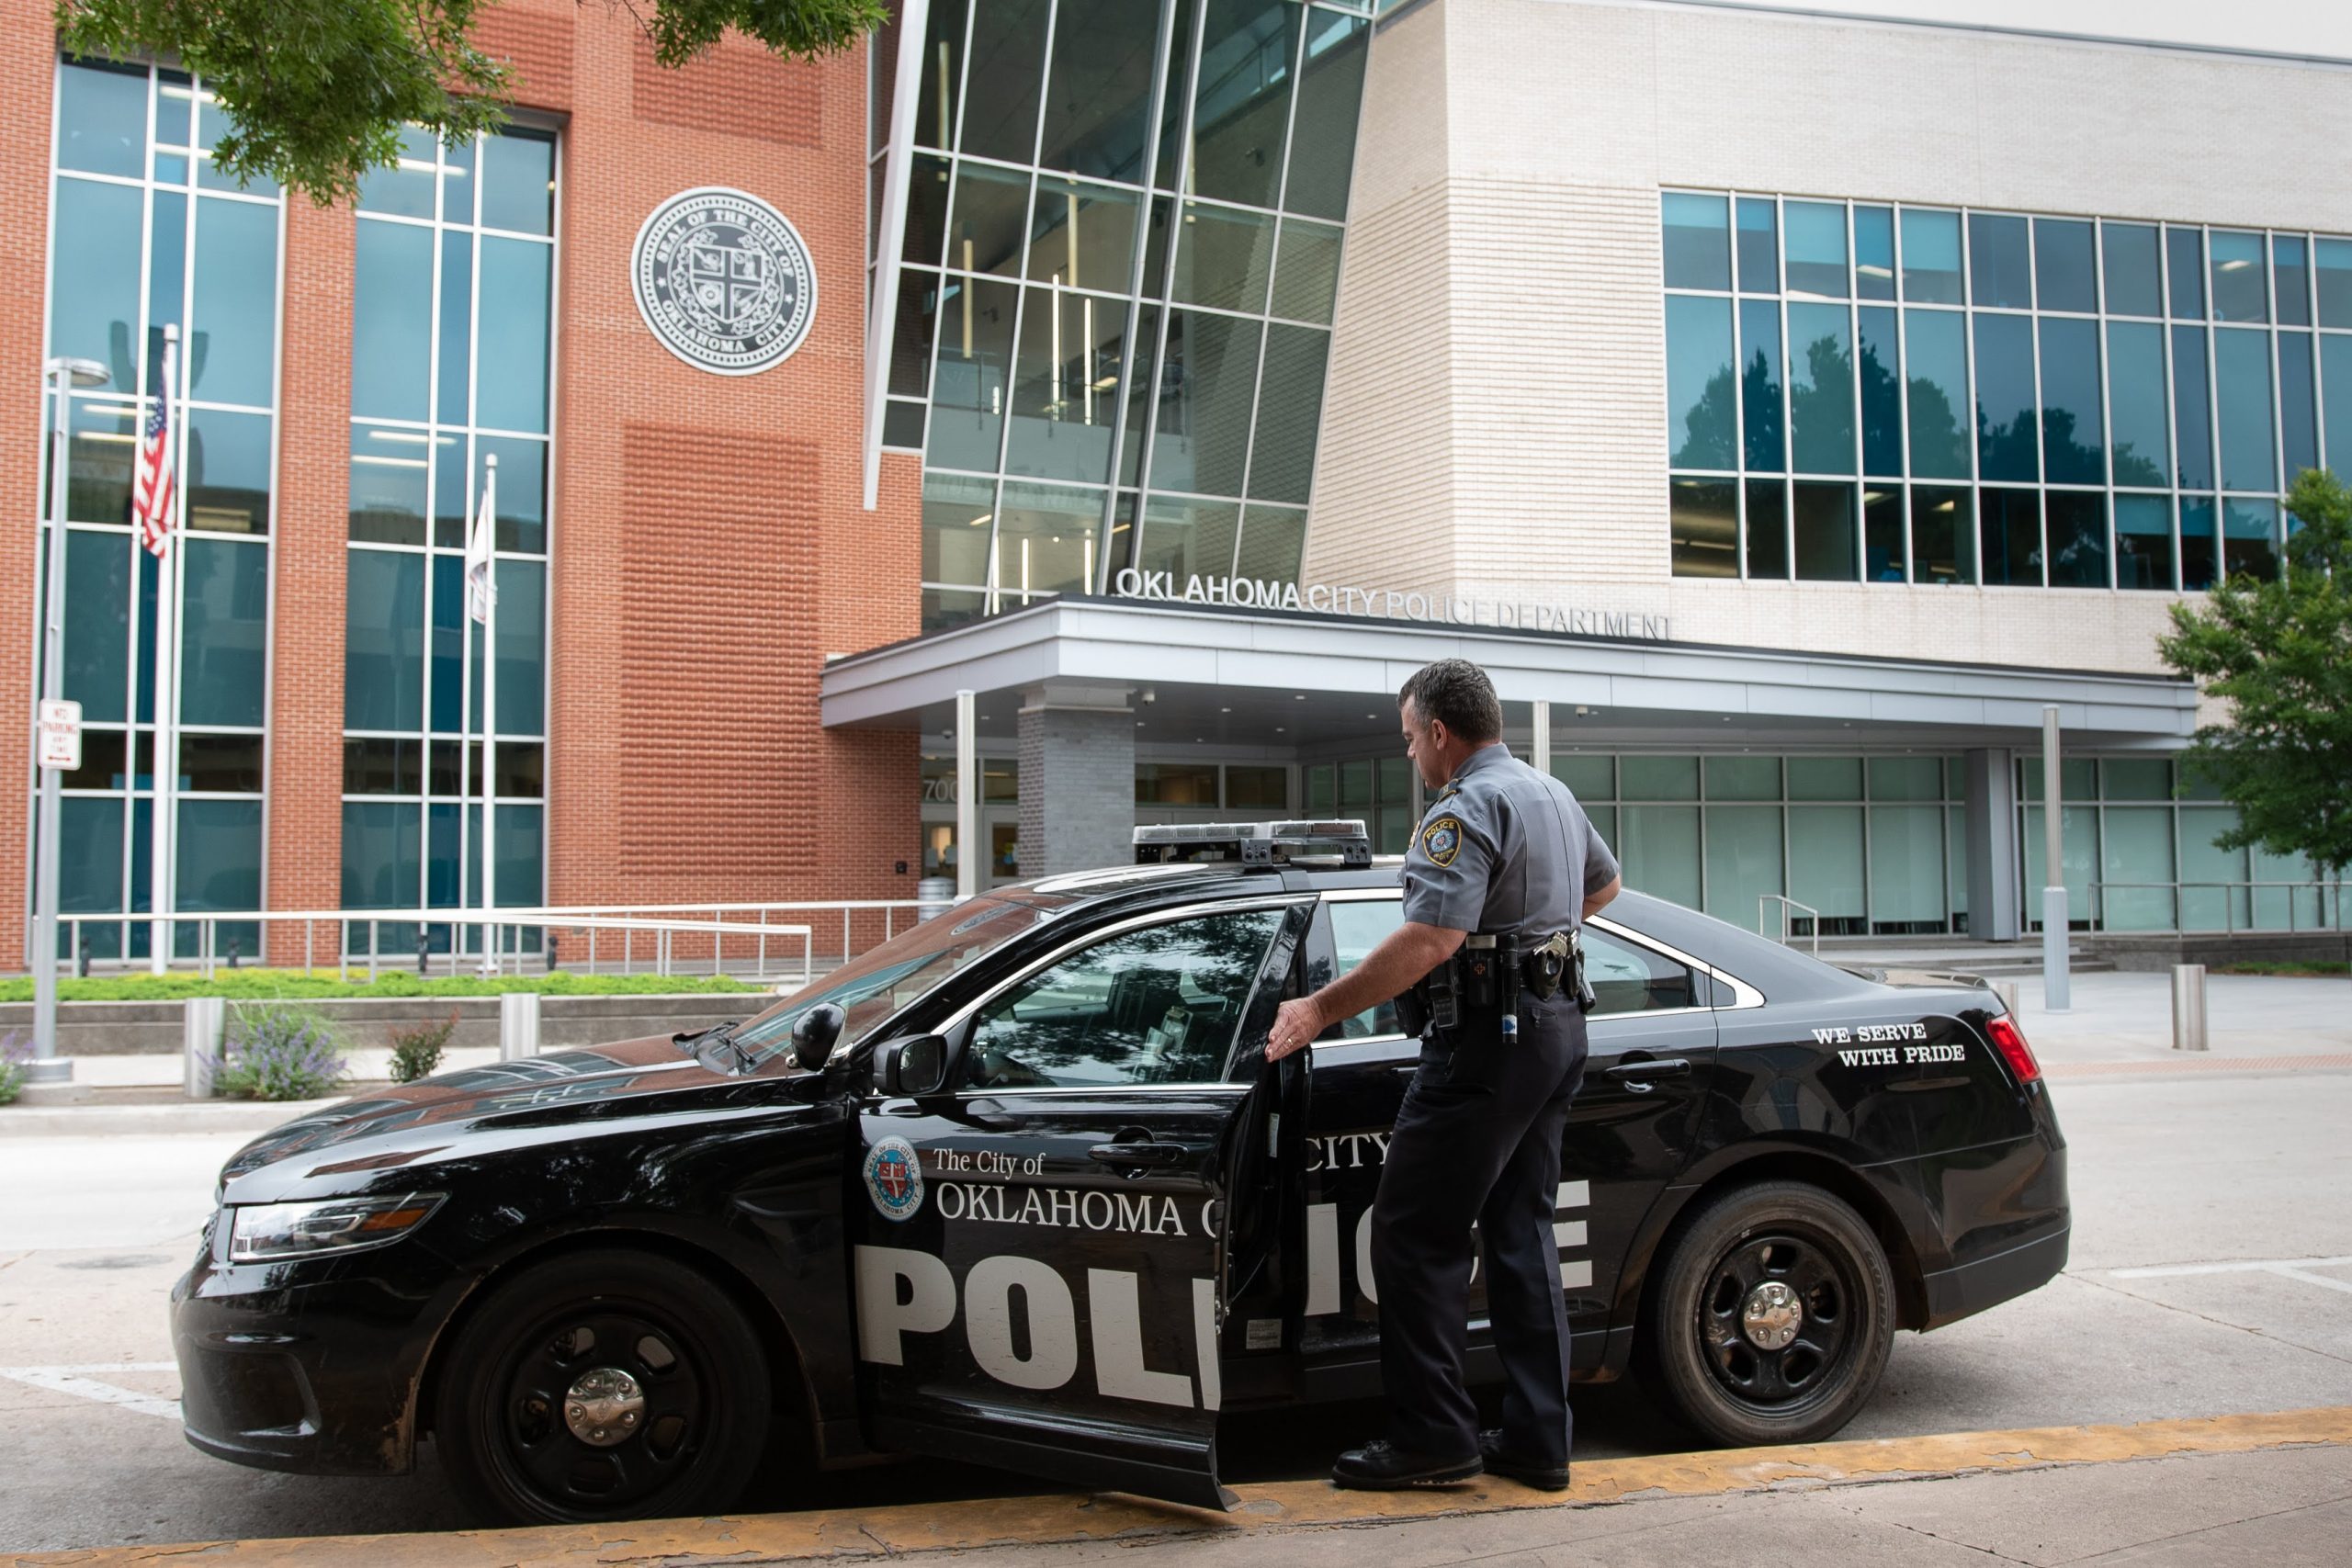 What Happens When Oklahoma City Police Respond to Mental Health Crises